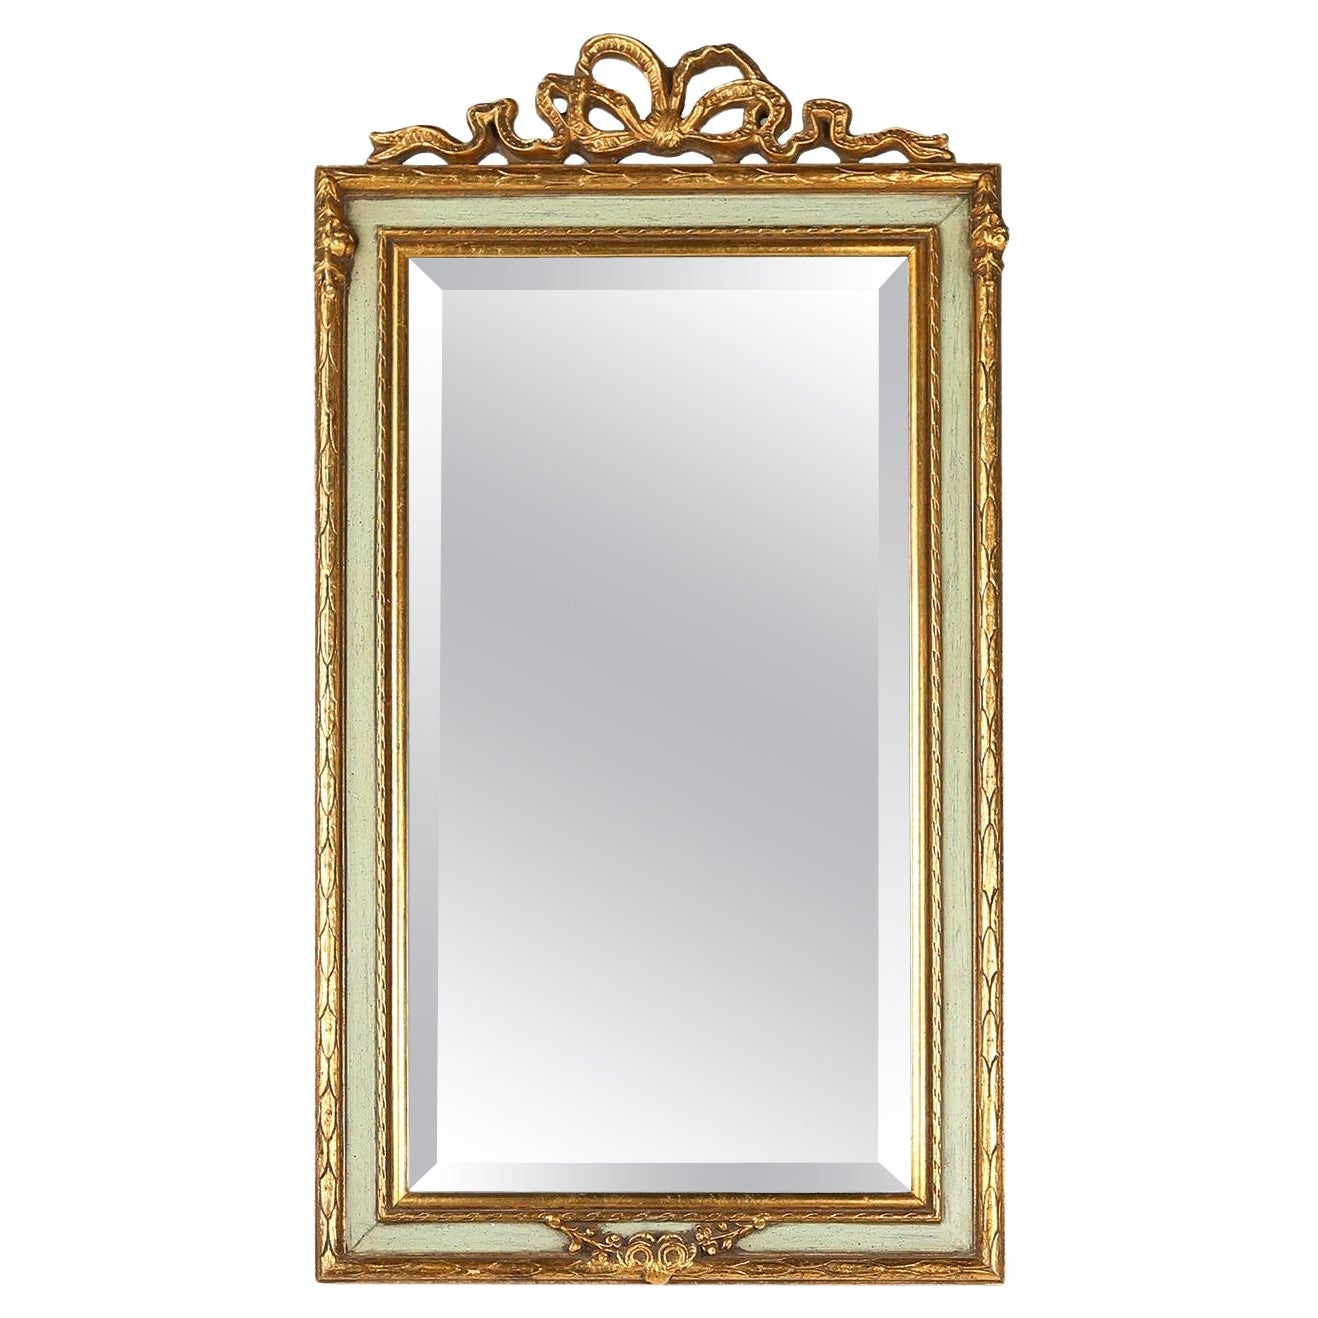 Classic mirror, romantically decorated 18th century style frame, France, 1950s For Sale